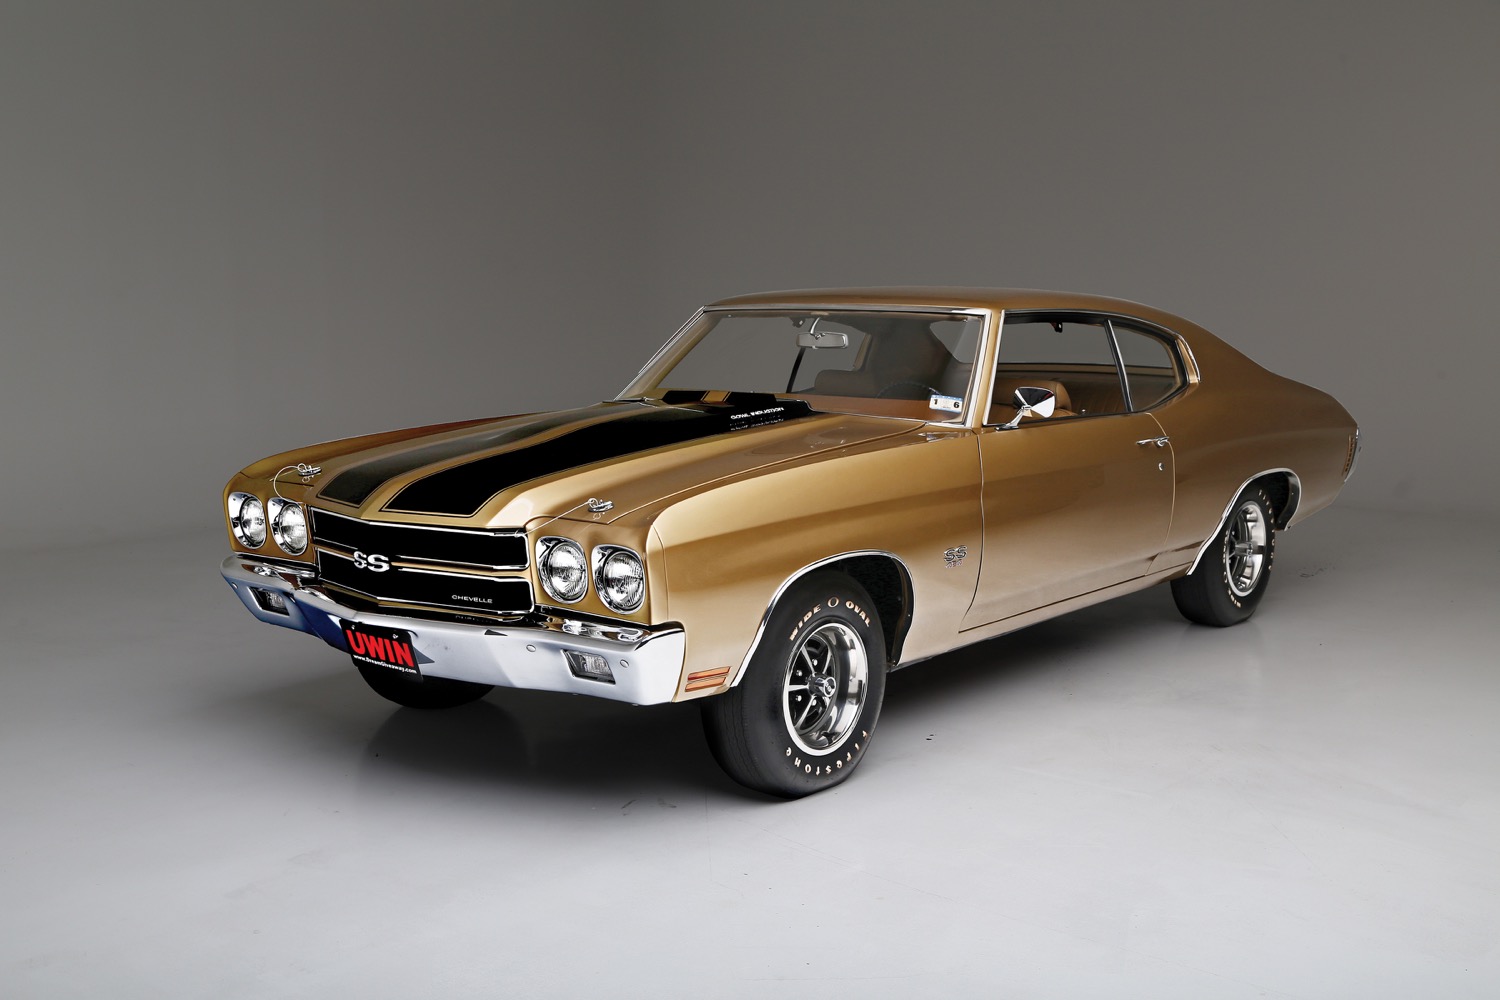 Rare Color 1970 Chevy Chevelle SS LS6 For Sale: Video